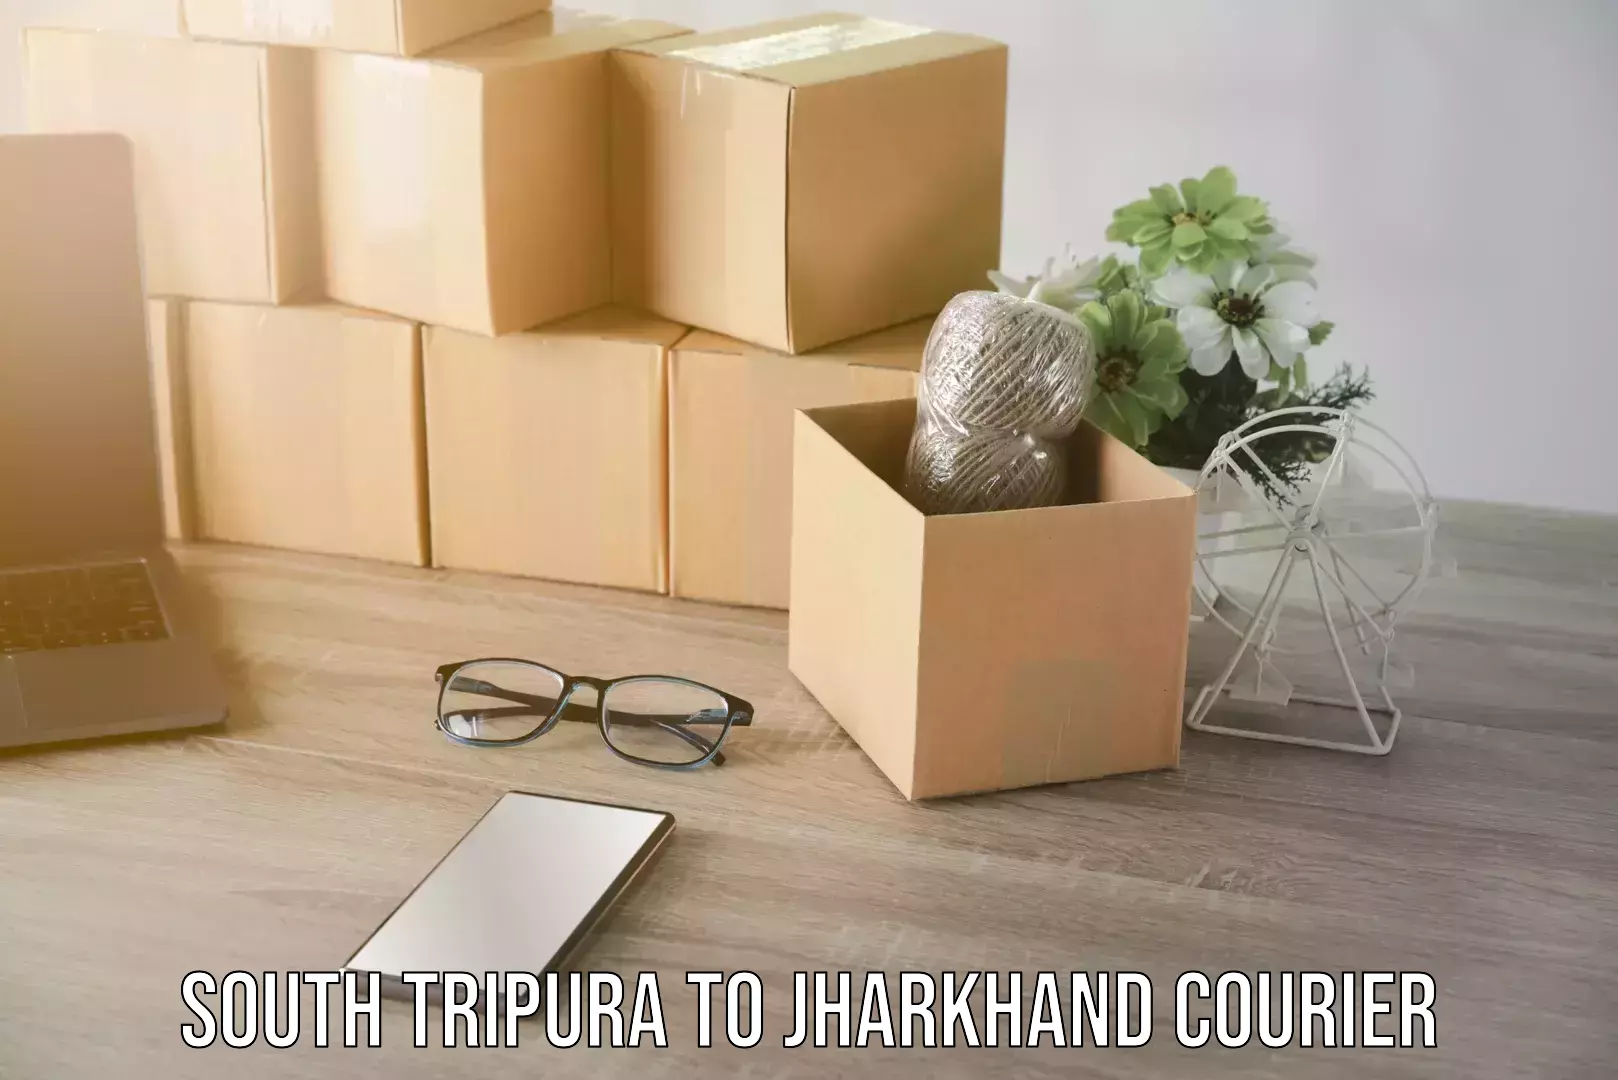 Weekend courier service South Tripura to Jharkhand